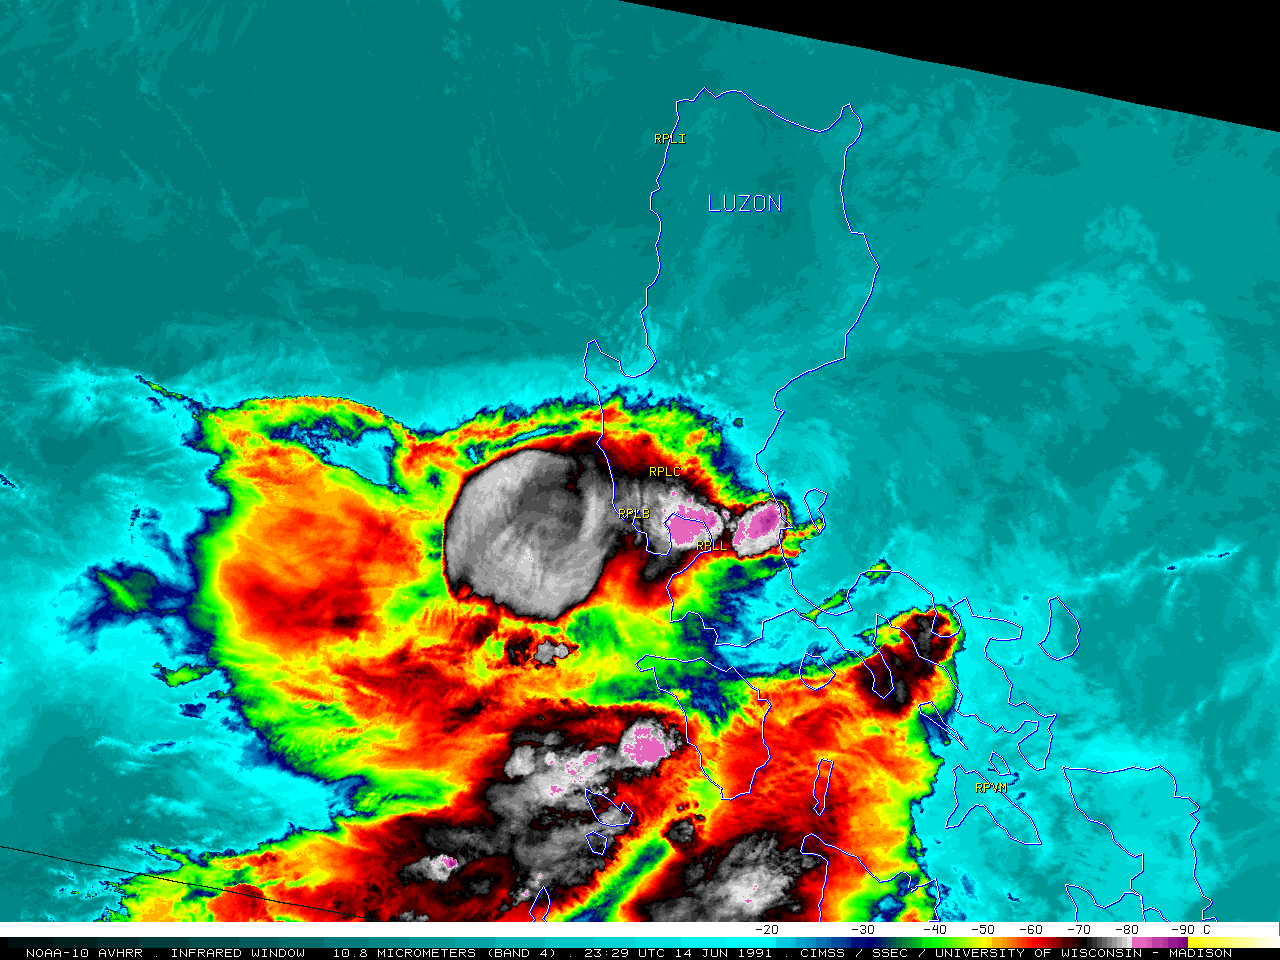 NOAA-10 AVHRR Infrared Window (10.8 µm), Visible (0.91 µm) and Shortwave Infrared (3.7 µm) images [click to enlarge]